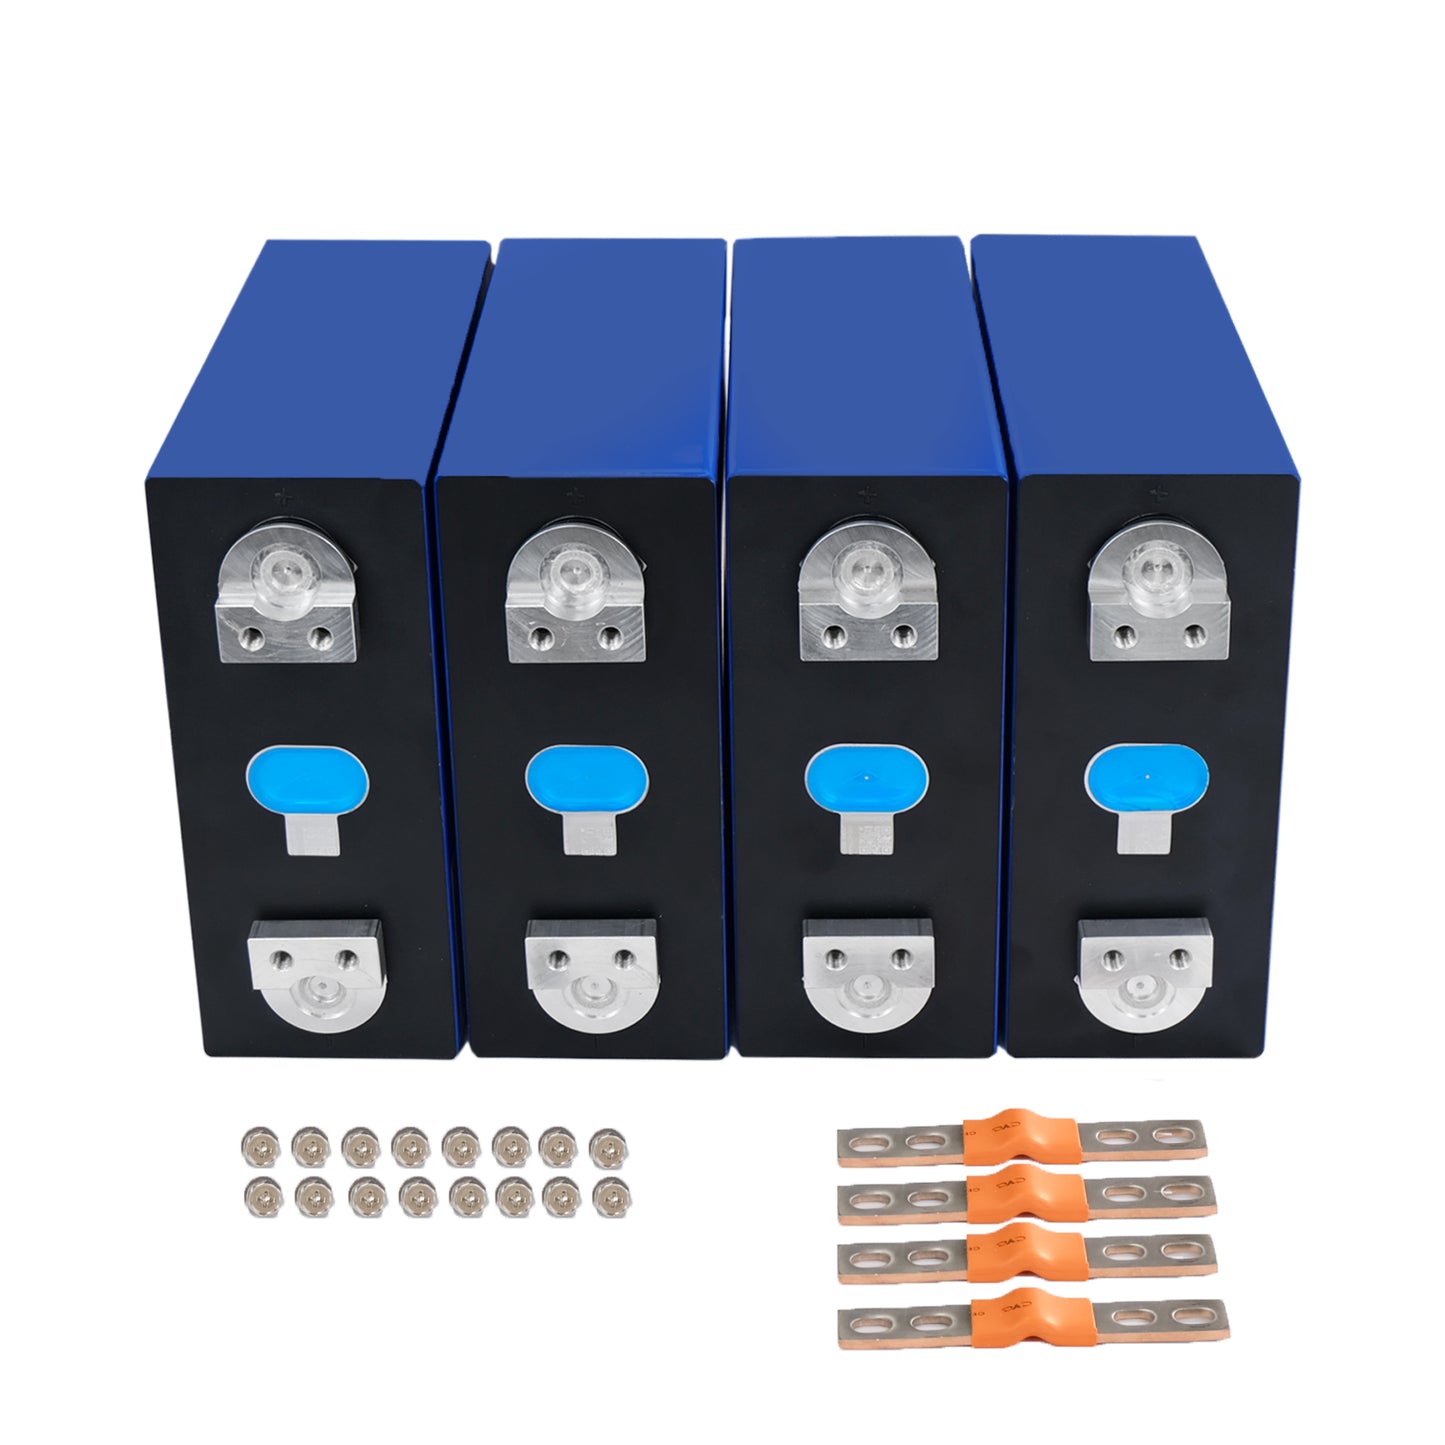 4PCS 3.2V Original Grade A EVE lf304 with Double-hole New Studs LiFePO4 Battery Cells China Shipping